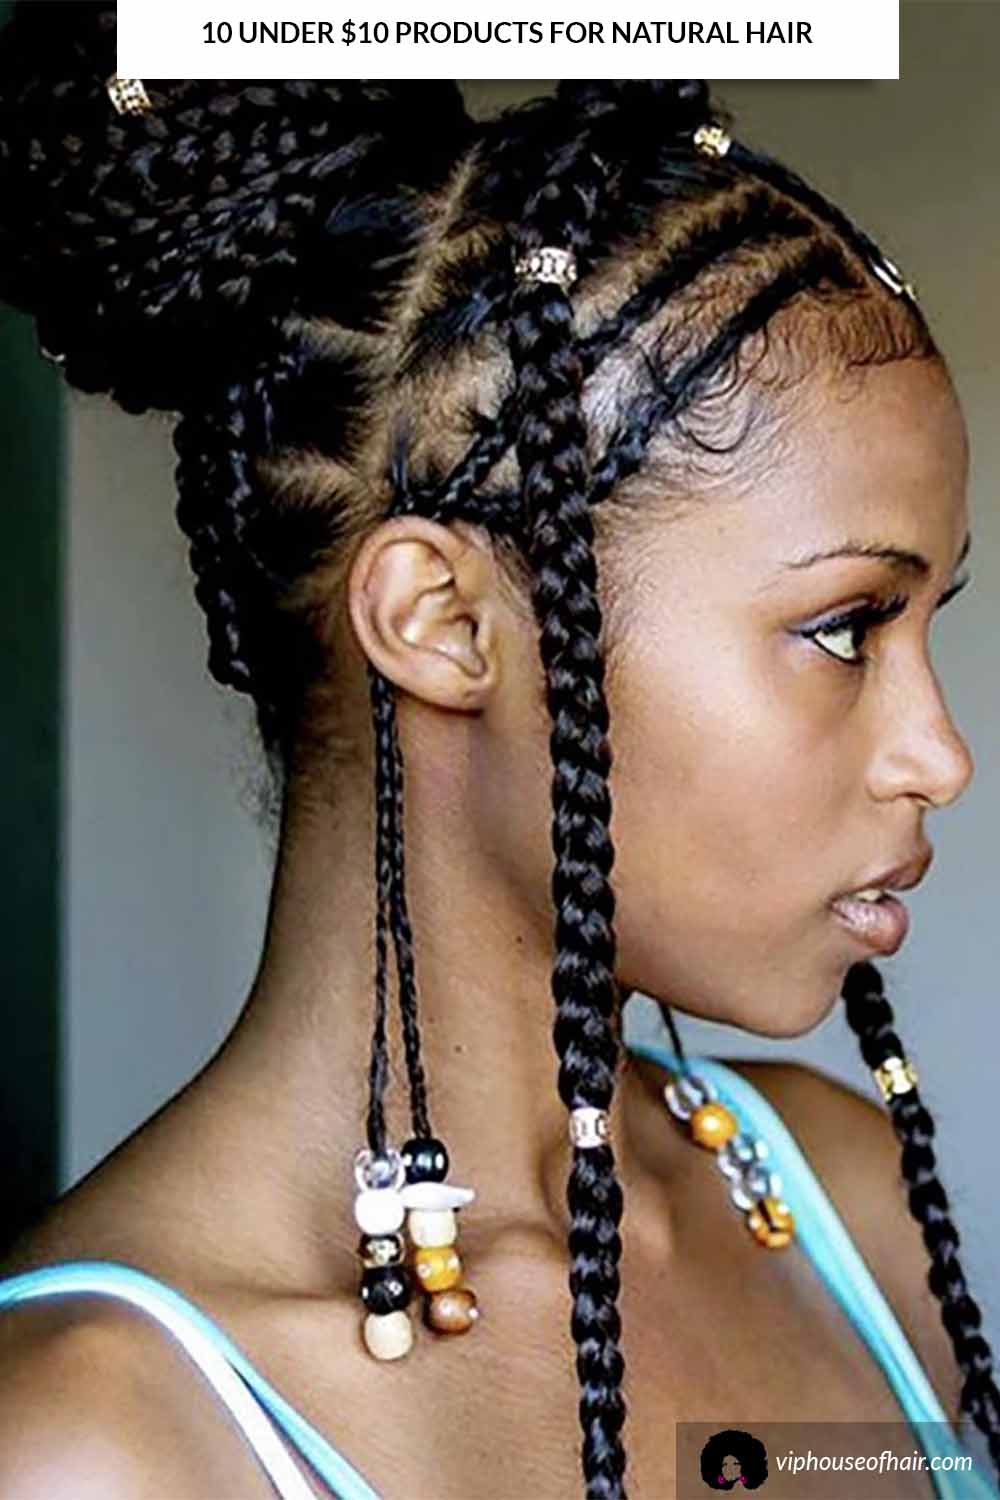 10 Under $10 Products For Natural Hair at VIP